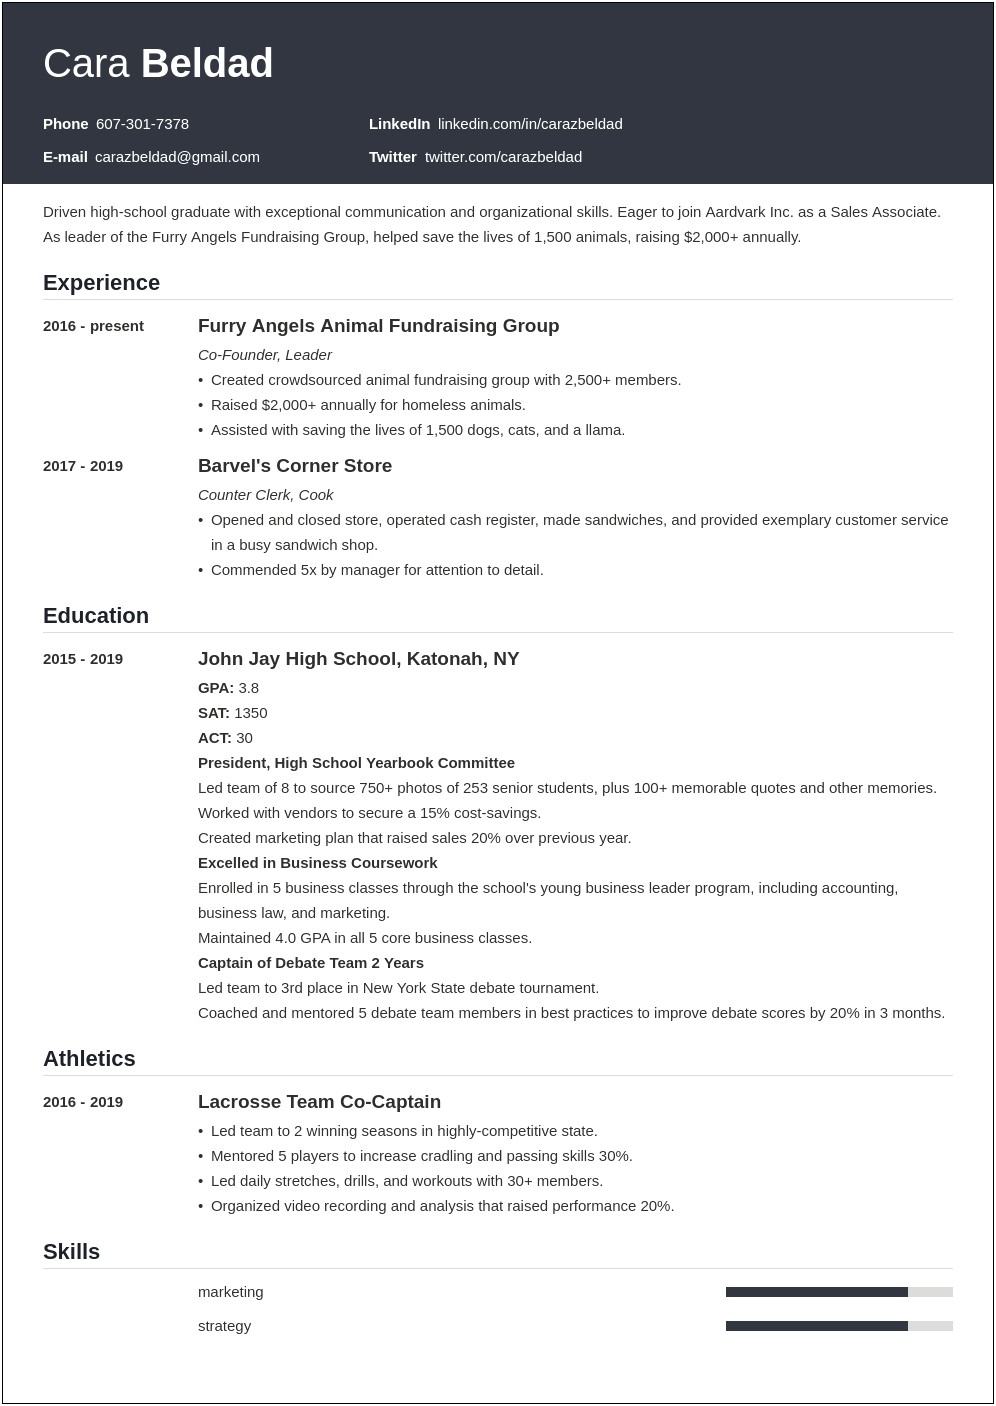 Resume For Highschool Graduate With Work Experience